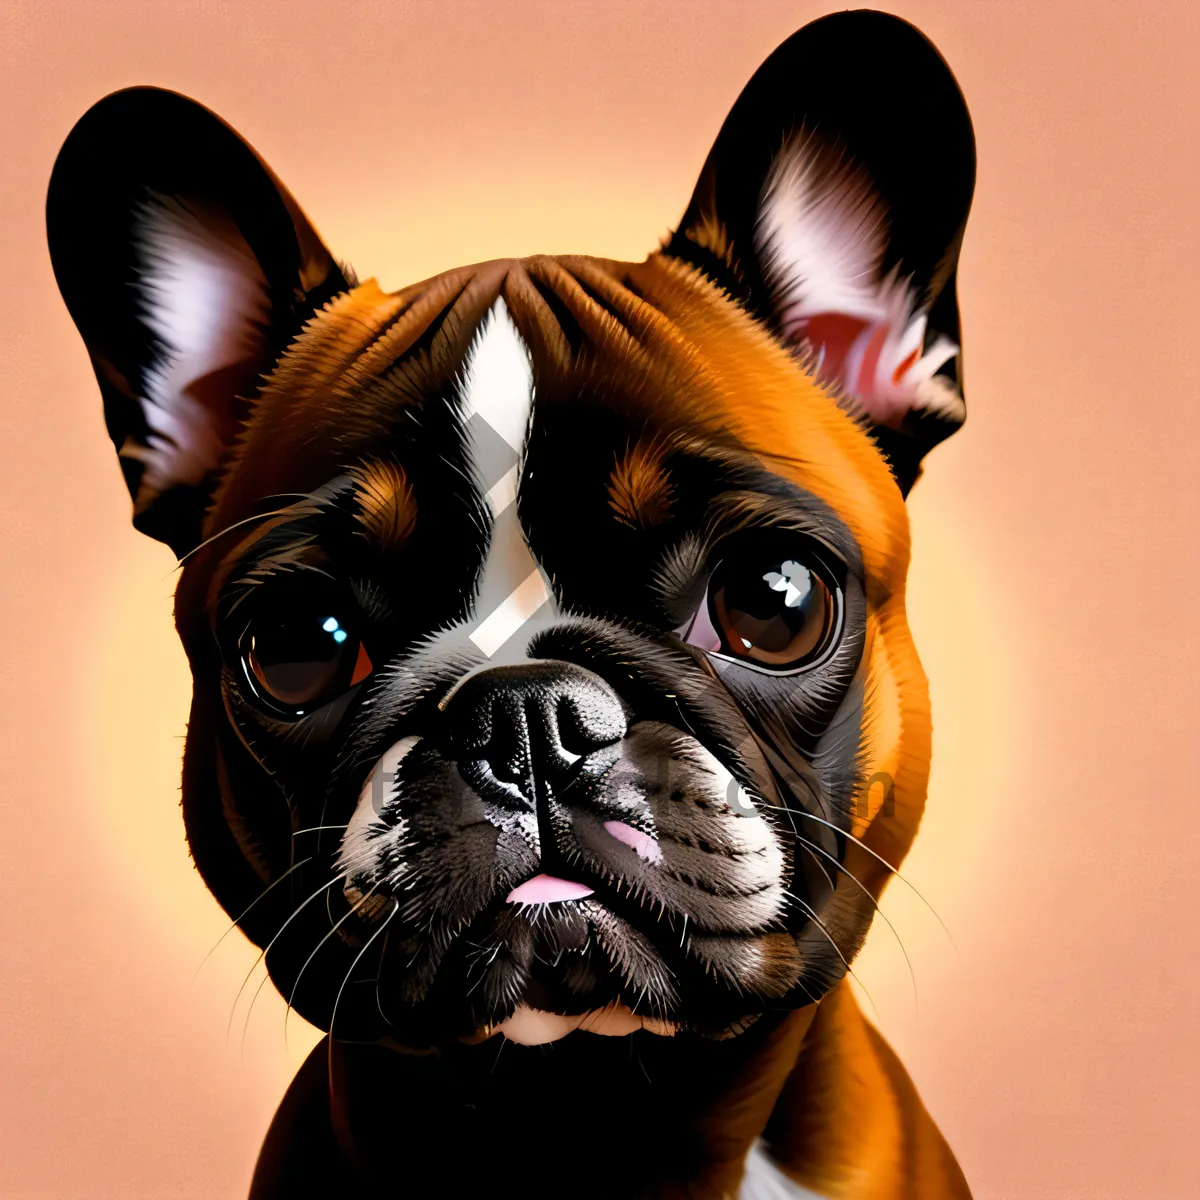 Picture of Adorable Bulldog Terrier: Studio Portrait of Playful Canine